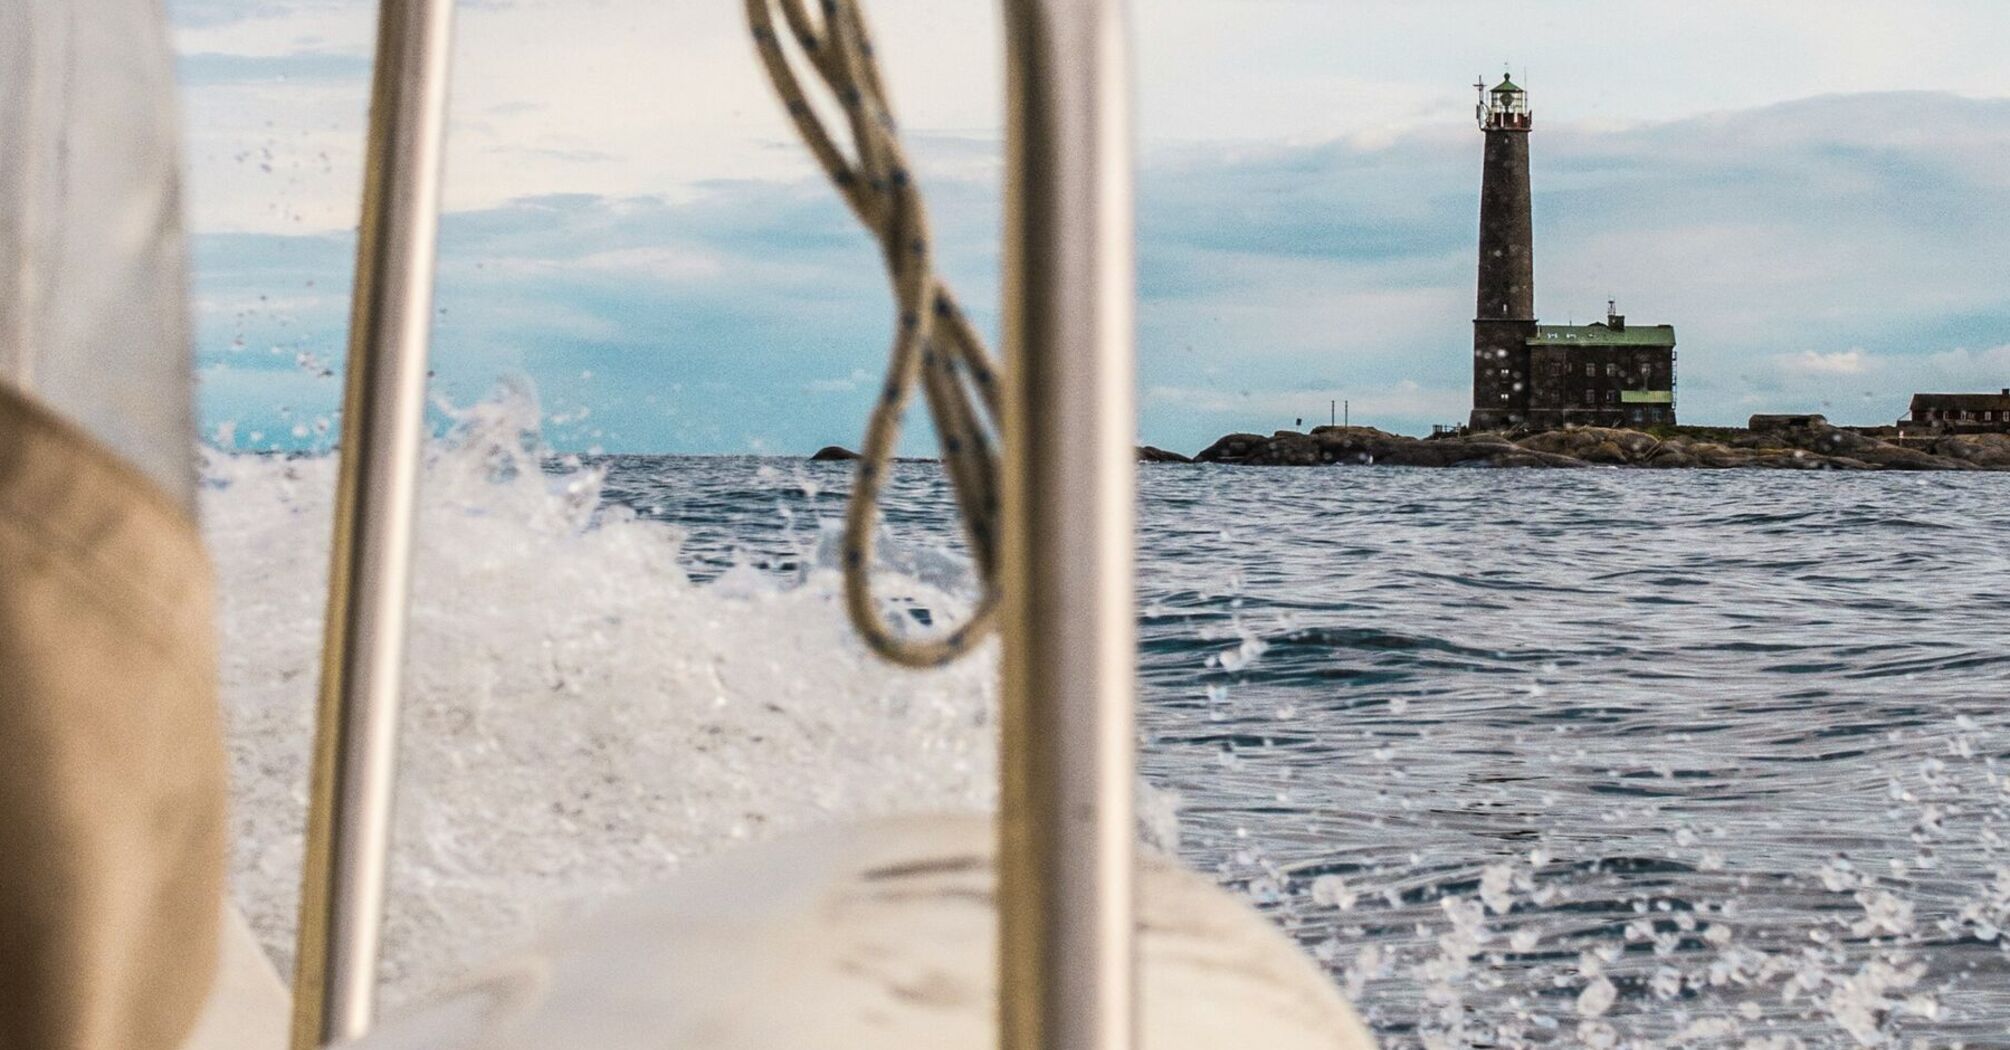 View of a lighthouse on Kimitoön Island from a boat, showcasing the rugged charm of the Finnish archipelago